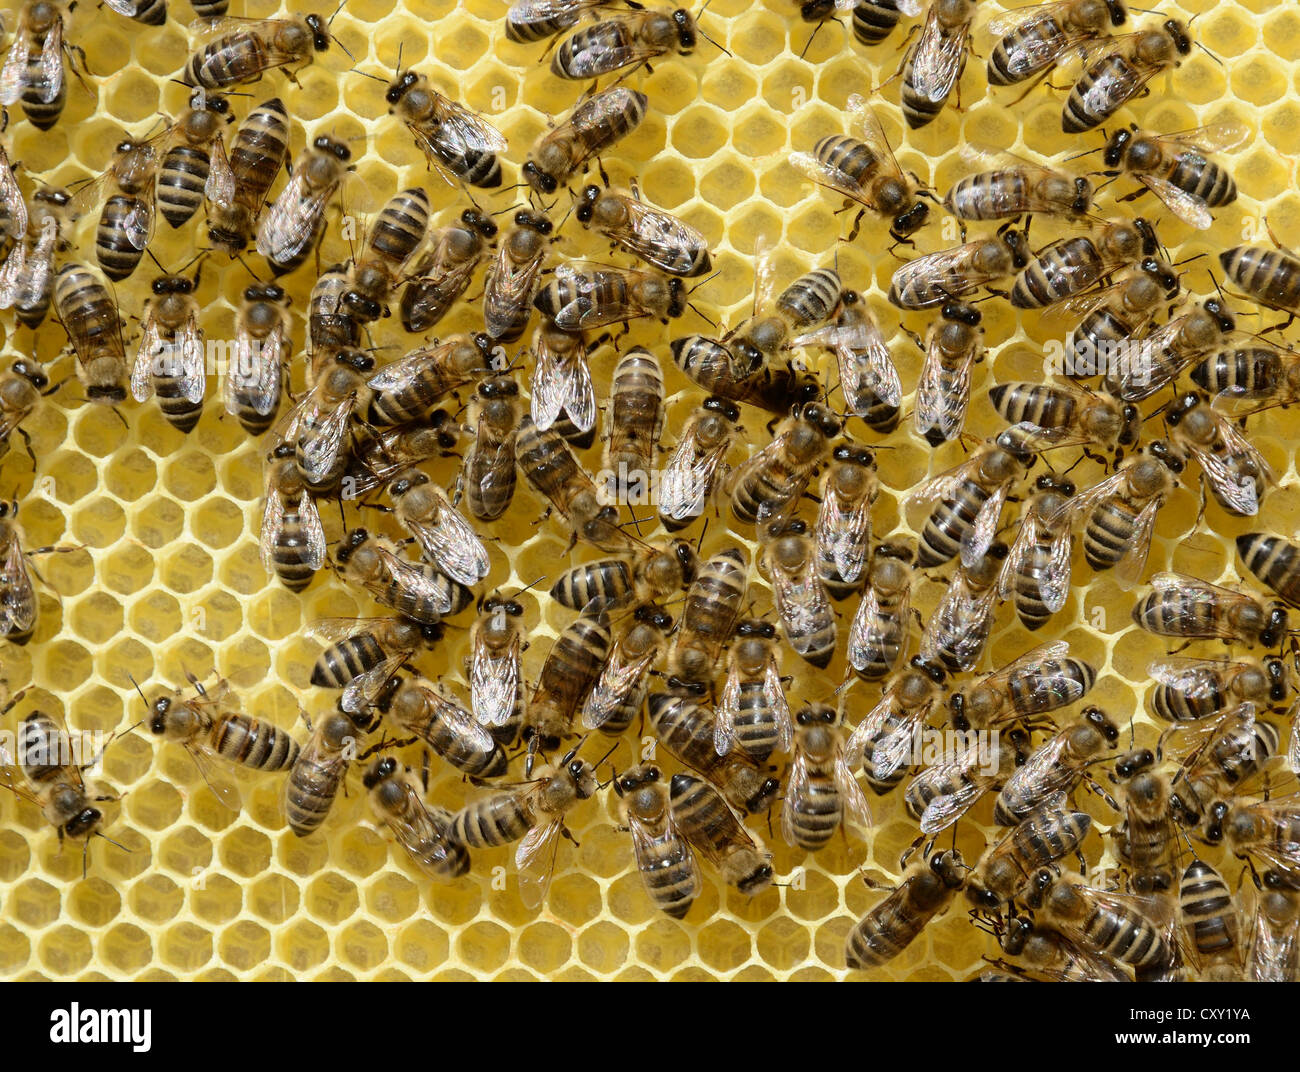 Newly developed honeycomb with worker bees (Apis mellifera var. carnica) Stock Photo